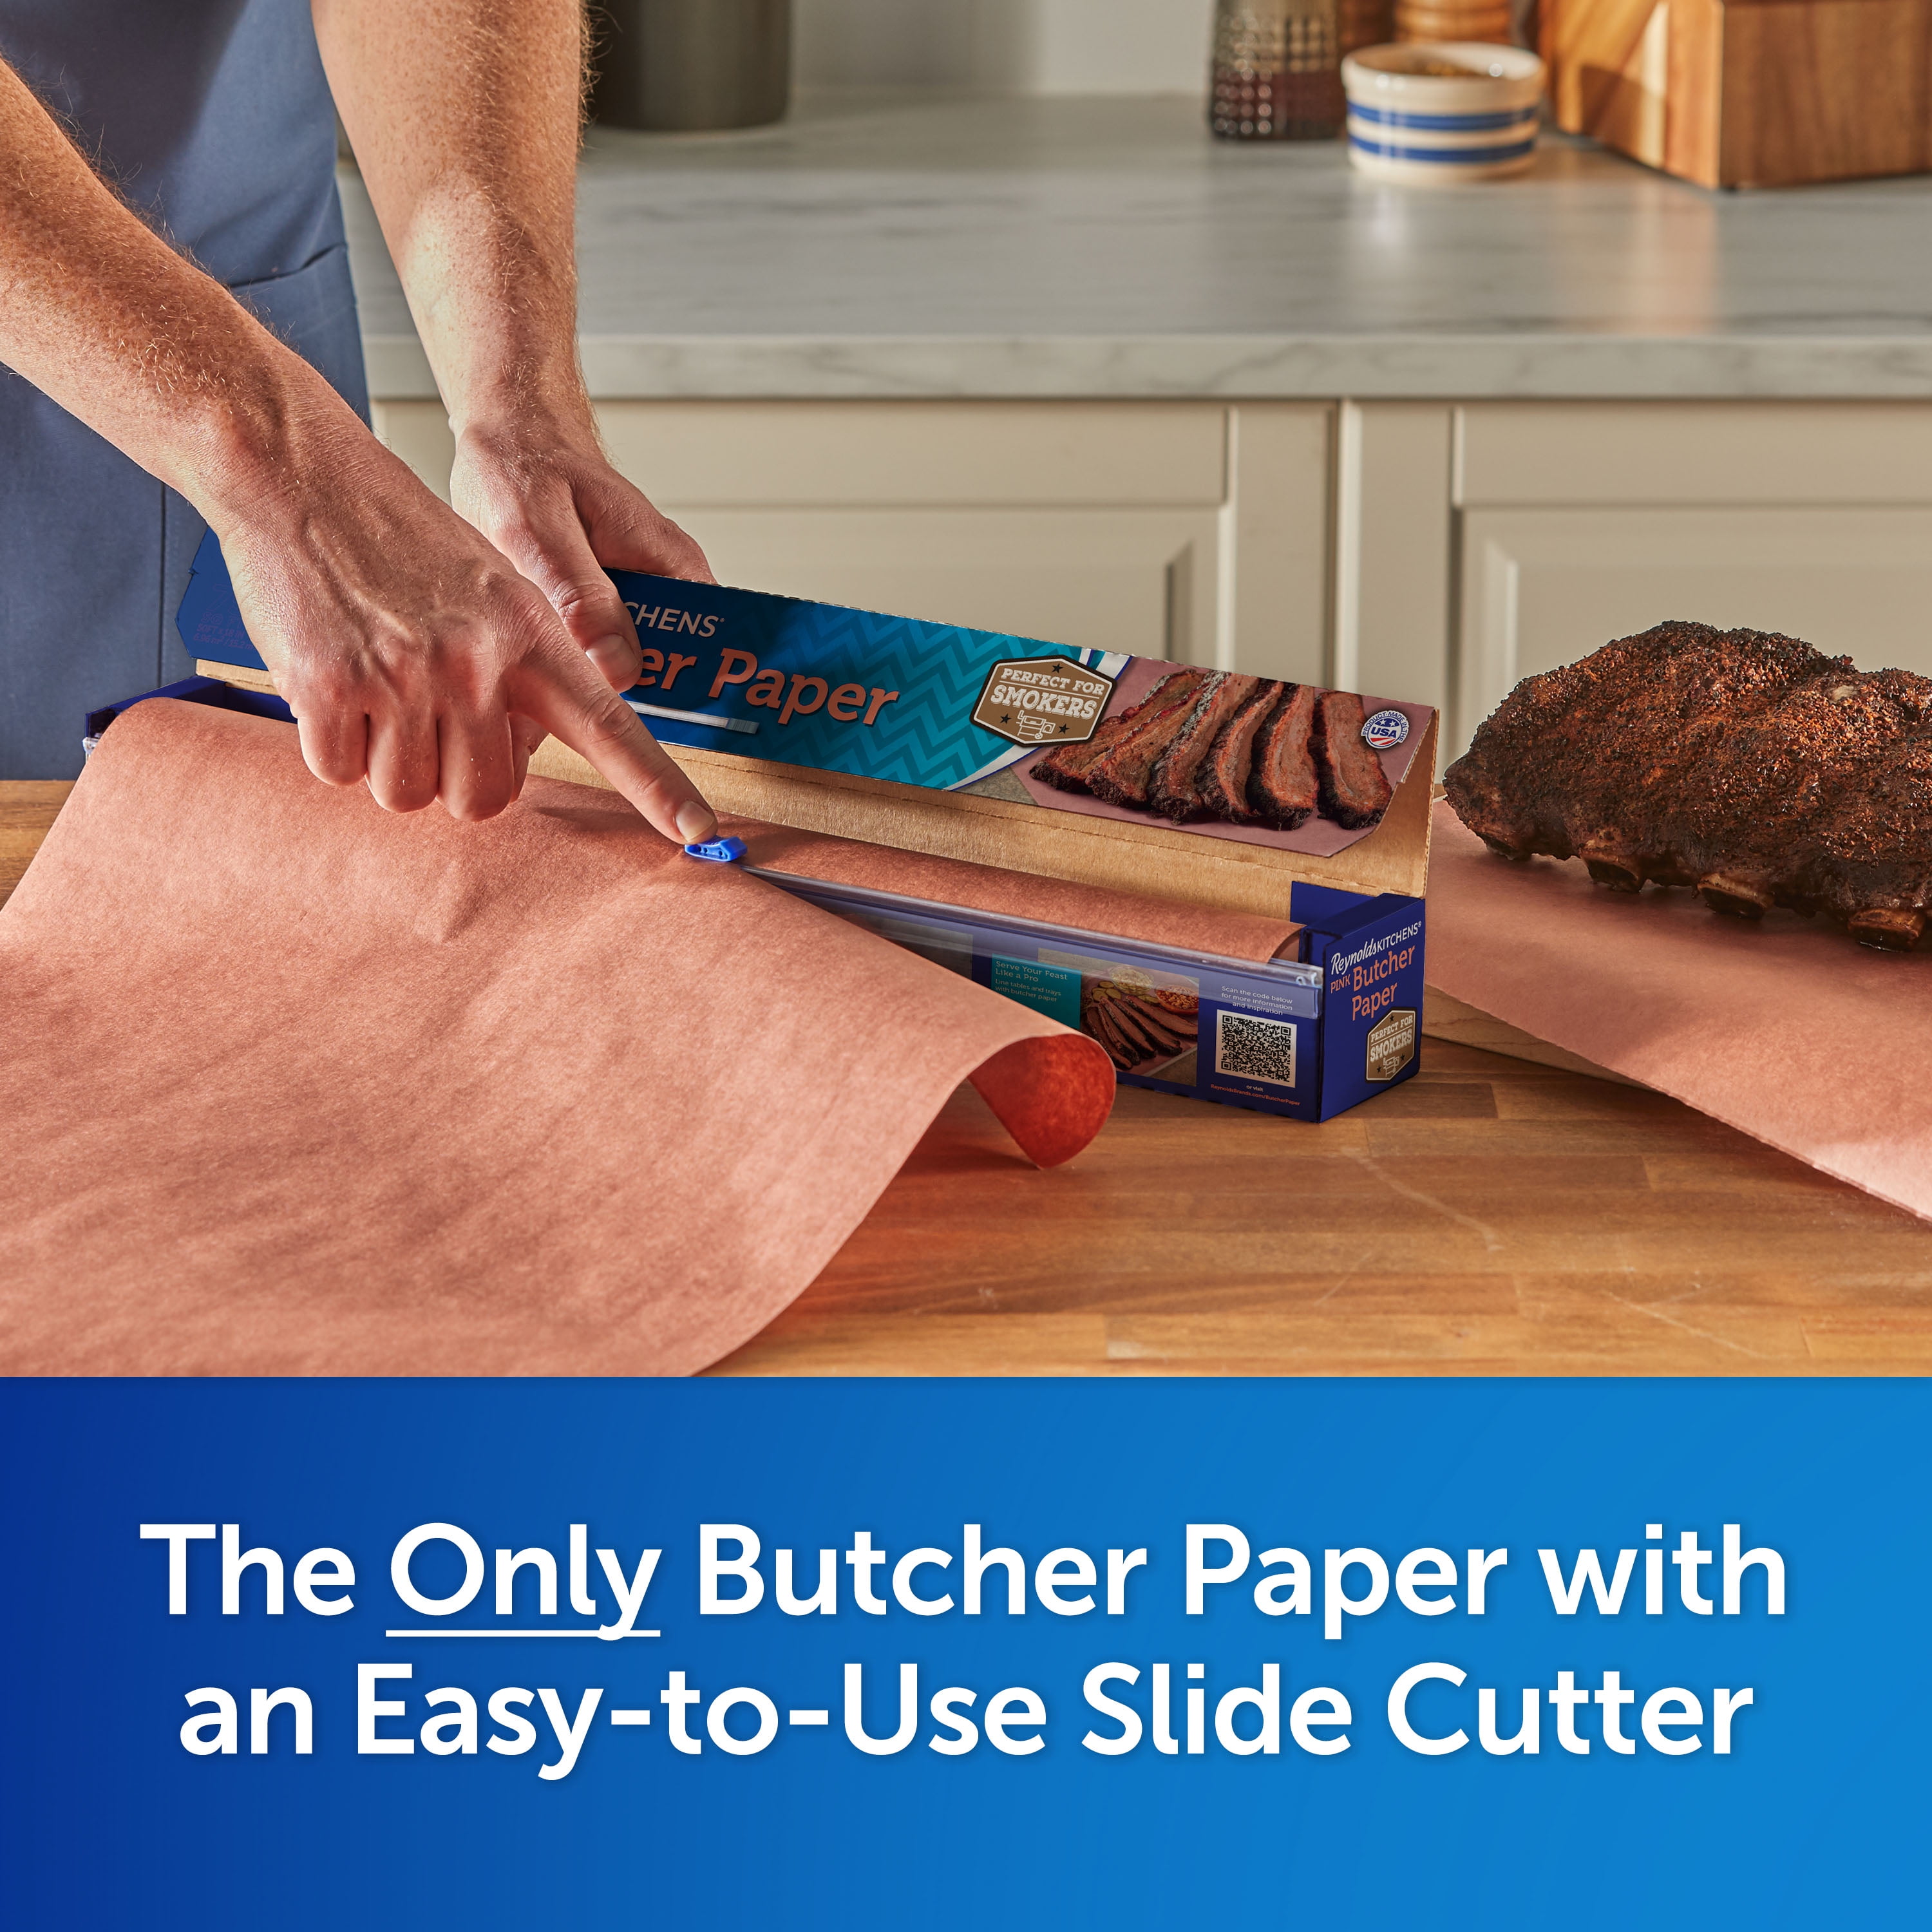 Reynolds Kitchens Pink Butcher Paper with Slide Cutter, 75 Square Feet